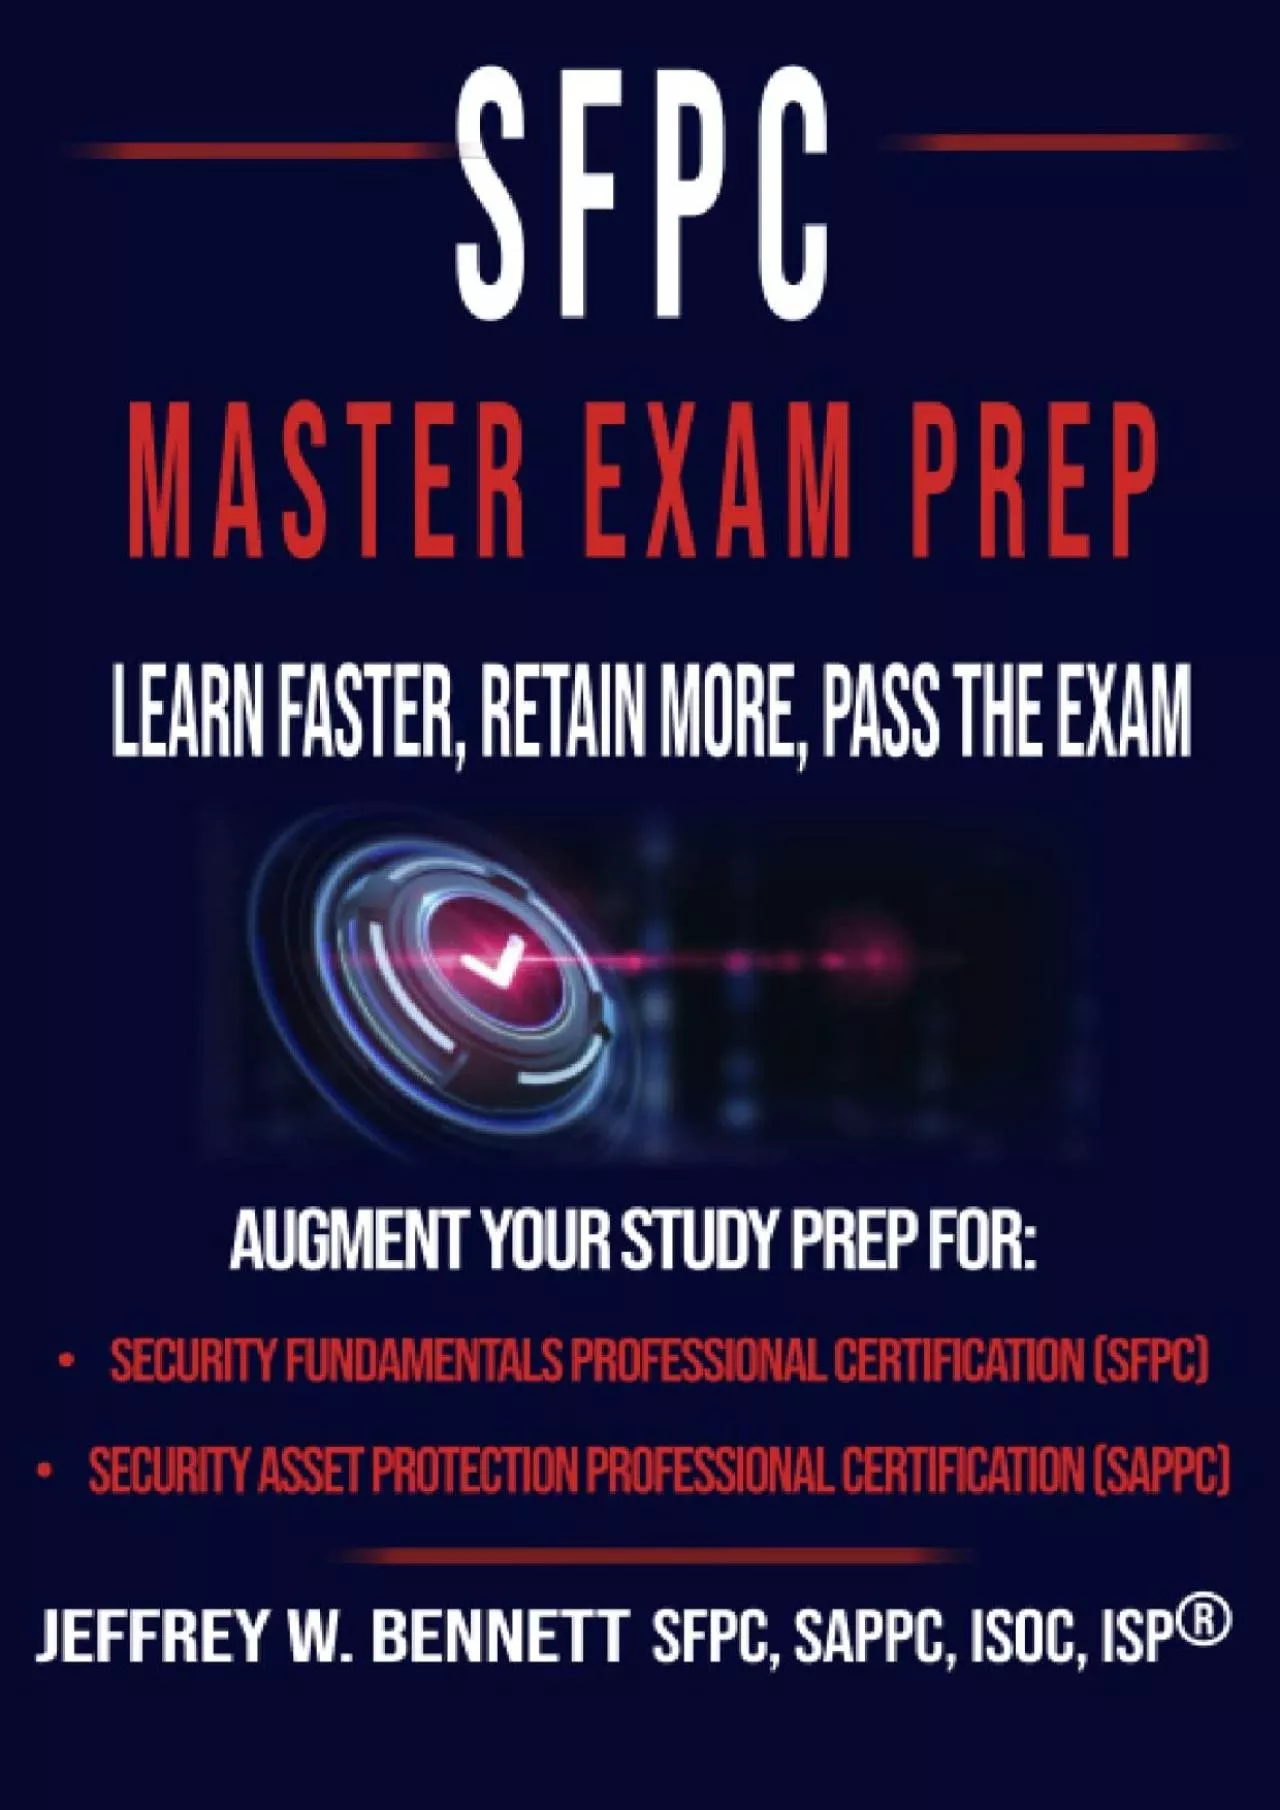 [DOWLOAD]-The SFPC Master Exam Prep - Learn Faster, Retain More, Pass the Exam (Security